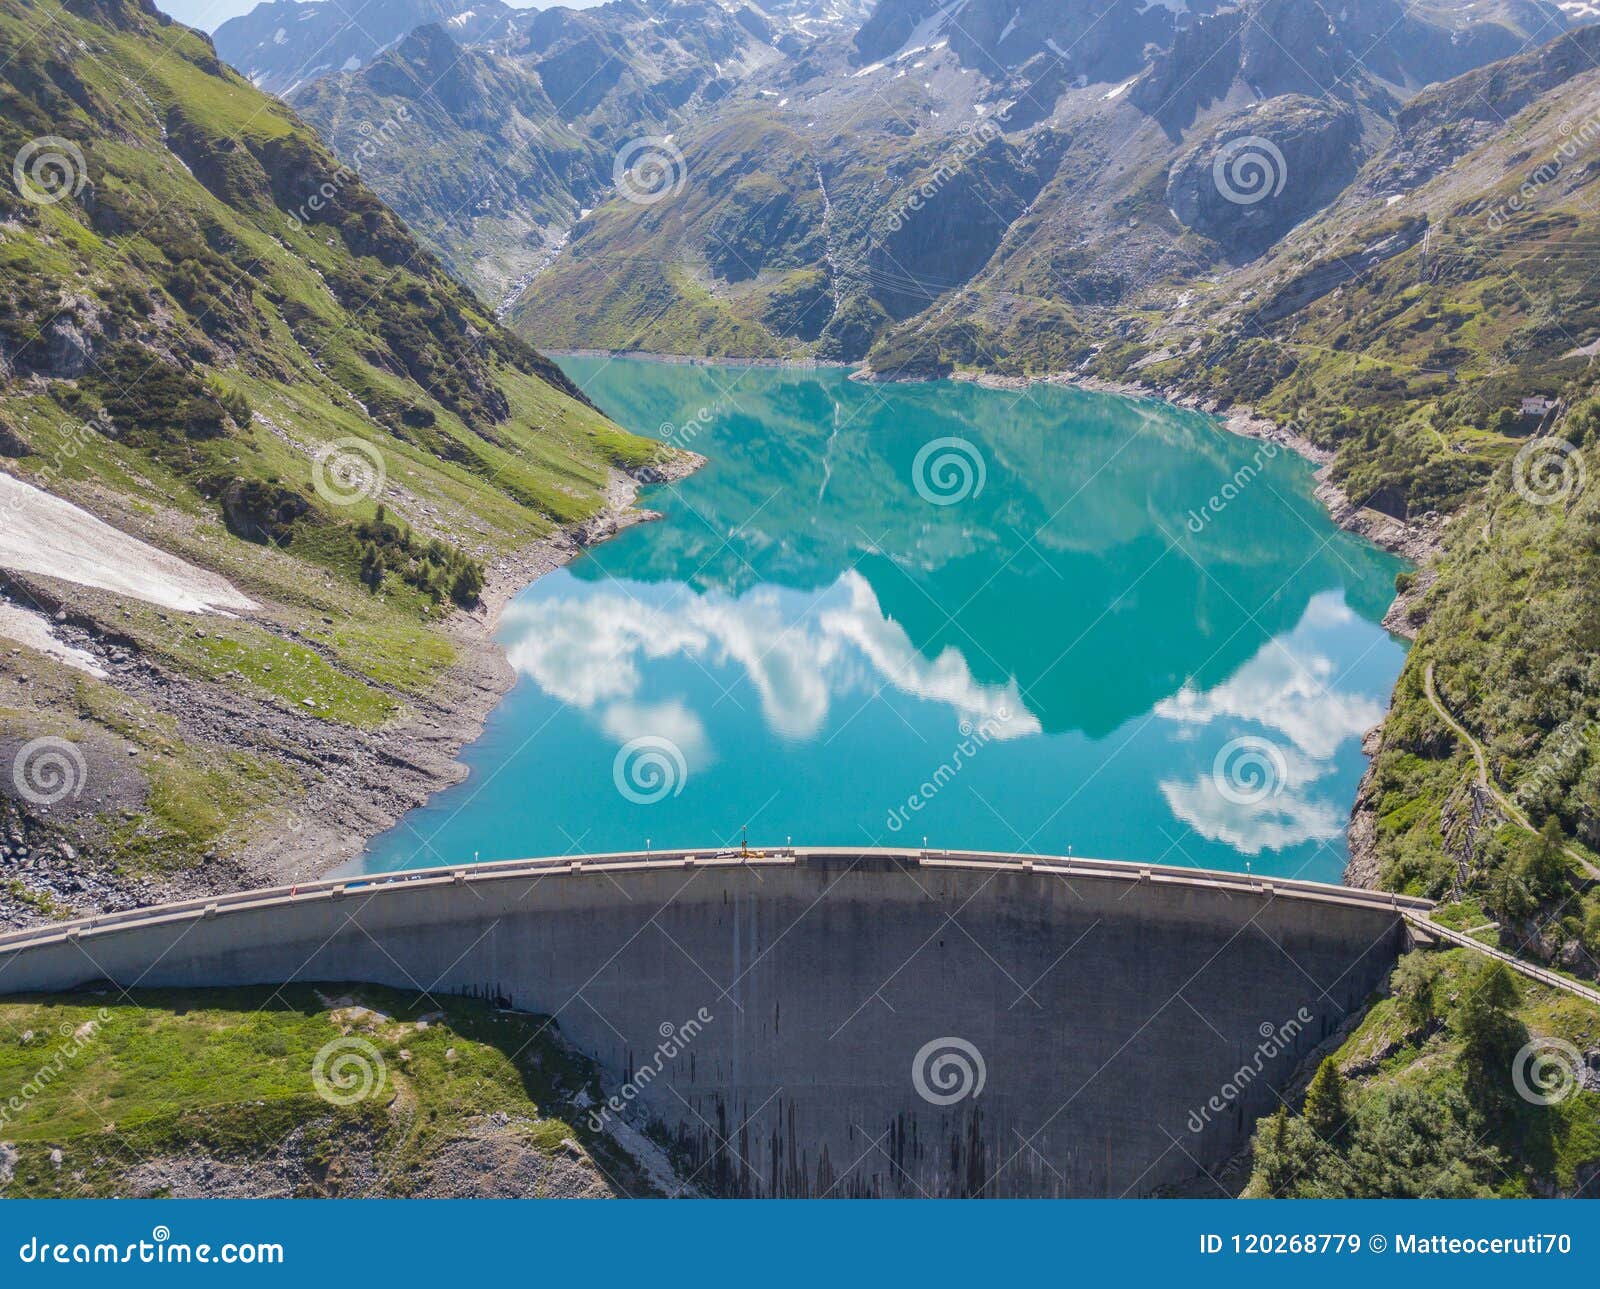 drone aerial view of the lake barbellino an alpine artificial lake and the mountain around it. italian alps. italy